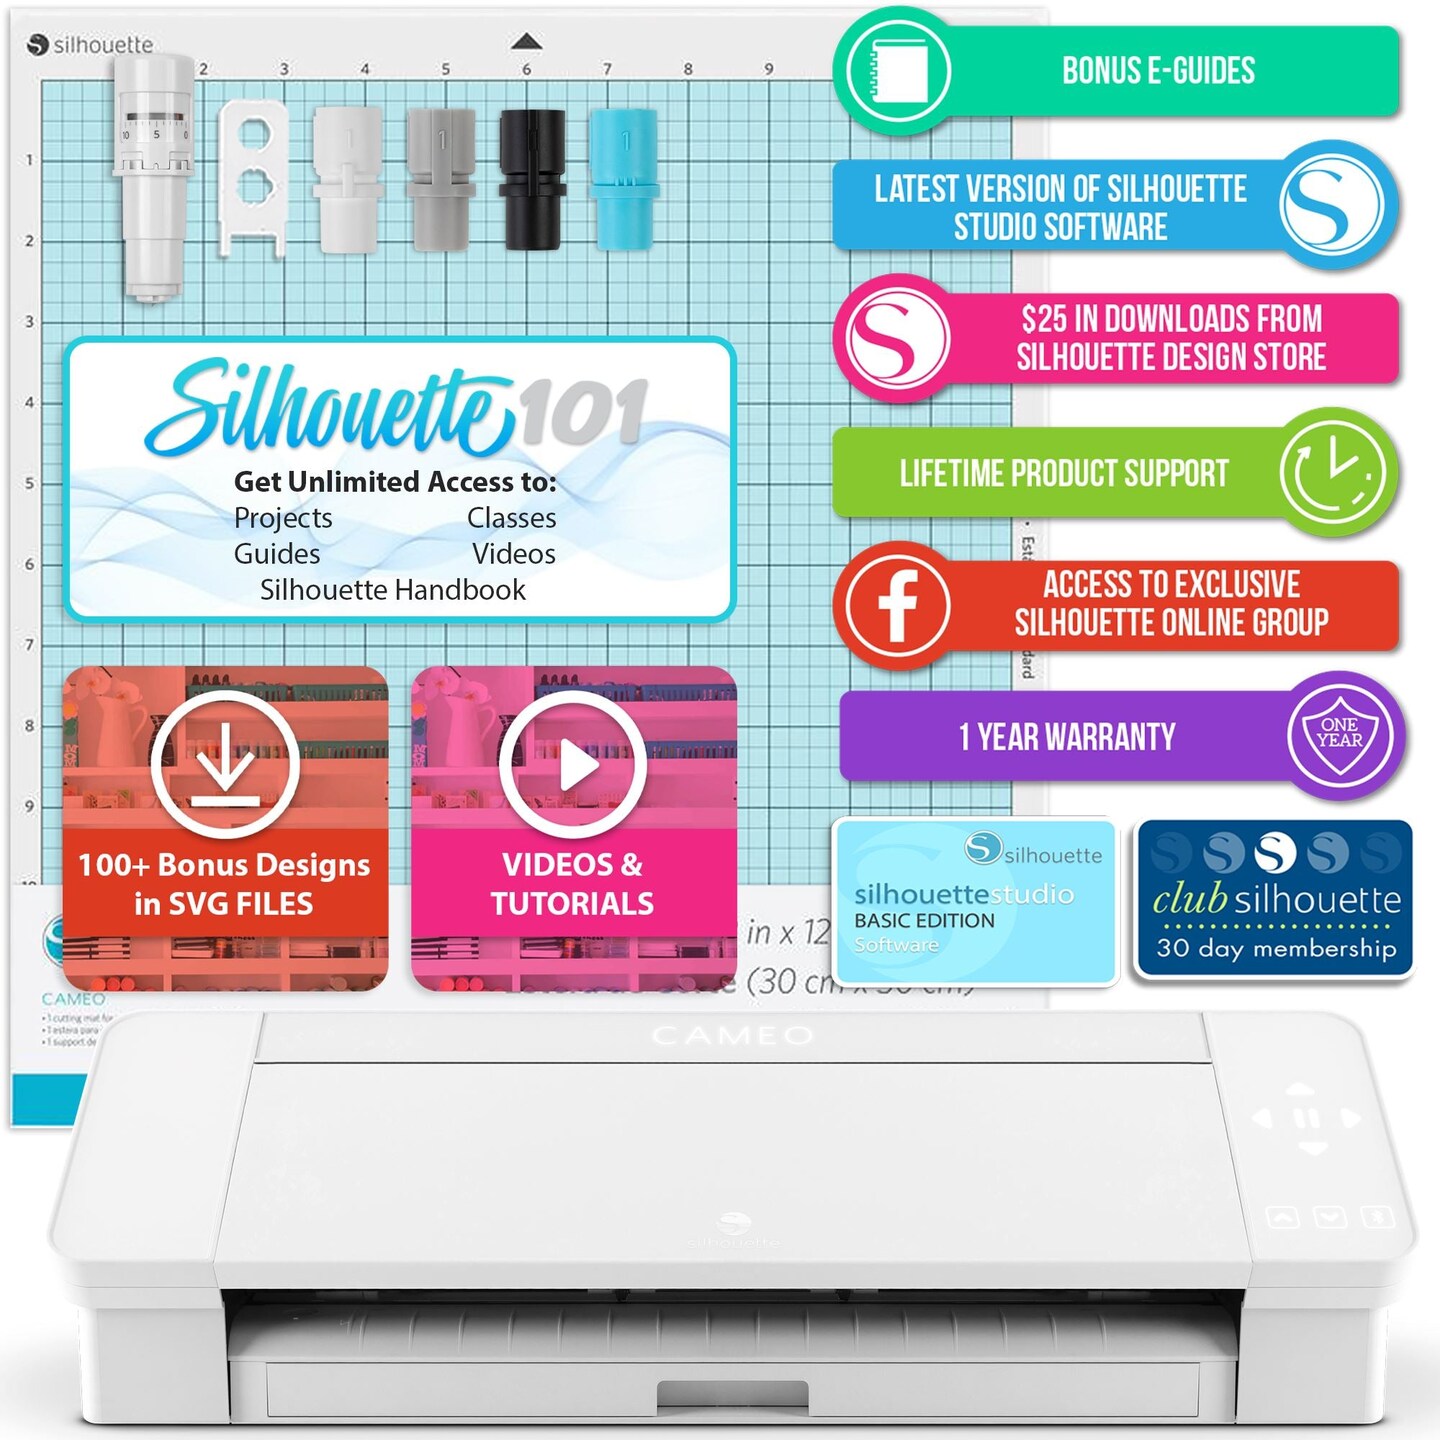 Silhouette White Cameo 4 Deluxe Siser Easyweed Heat Transfer (HTV) Bundle